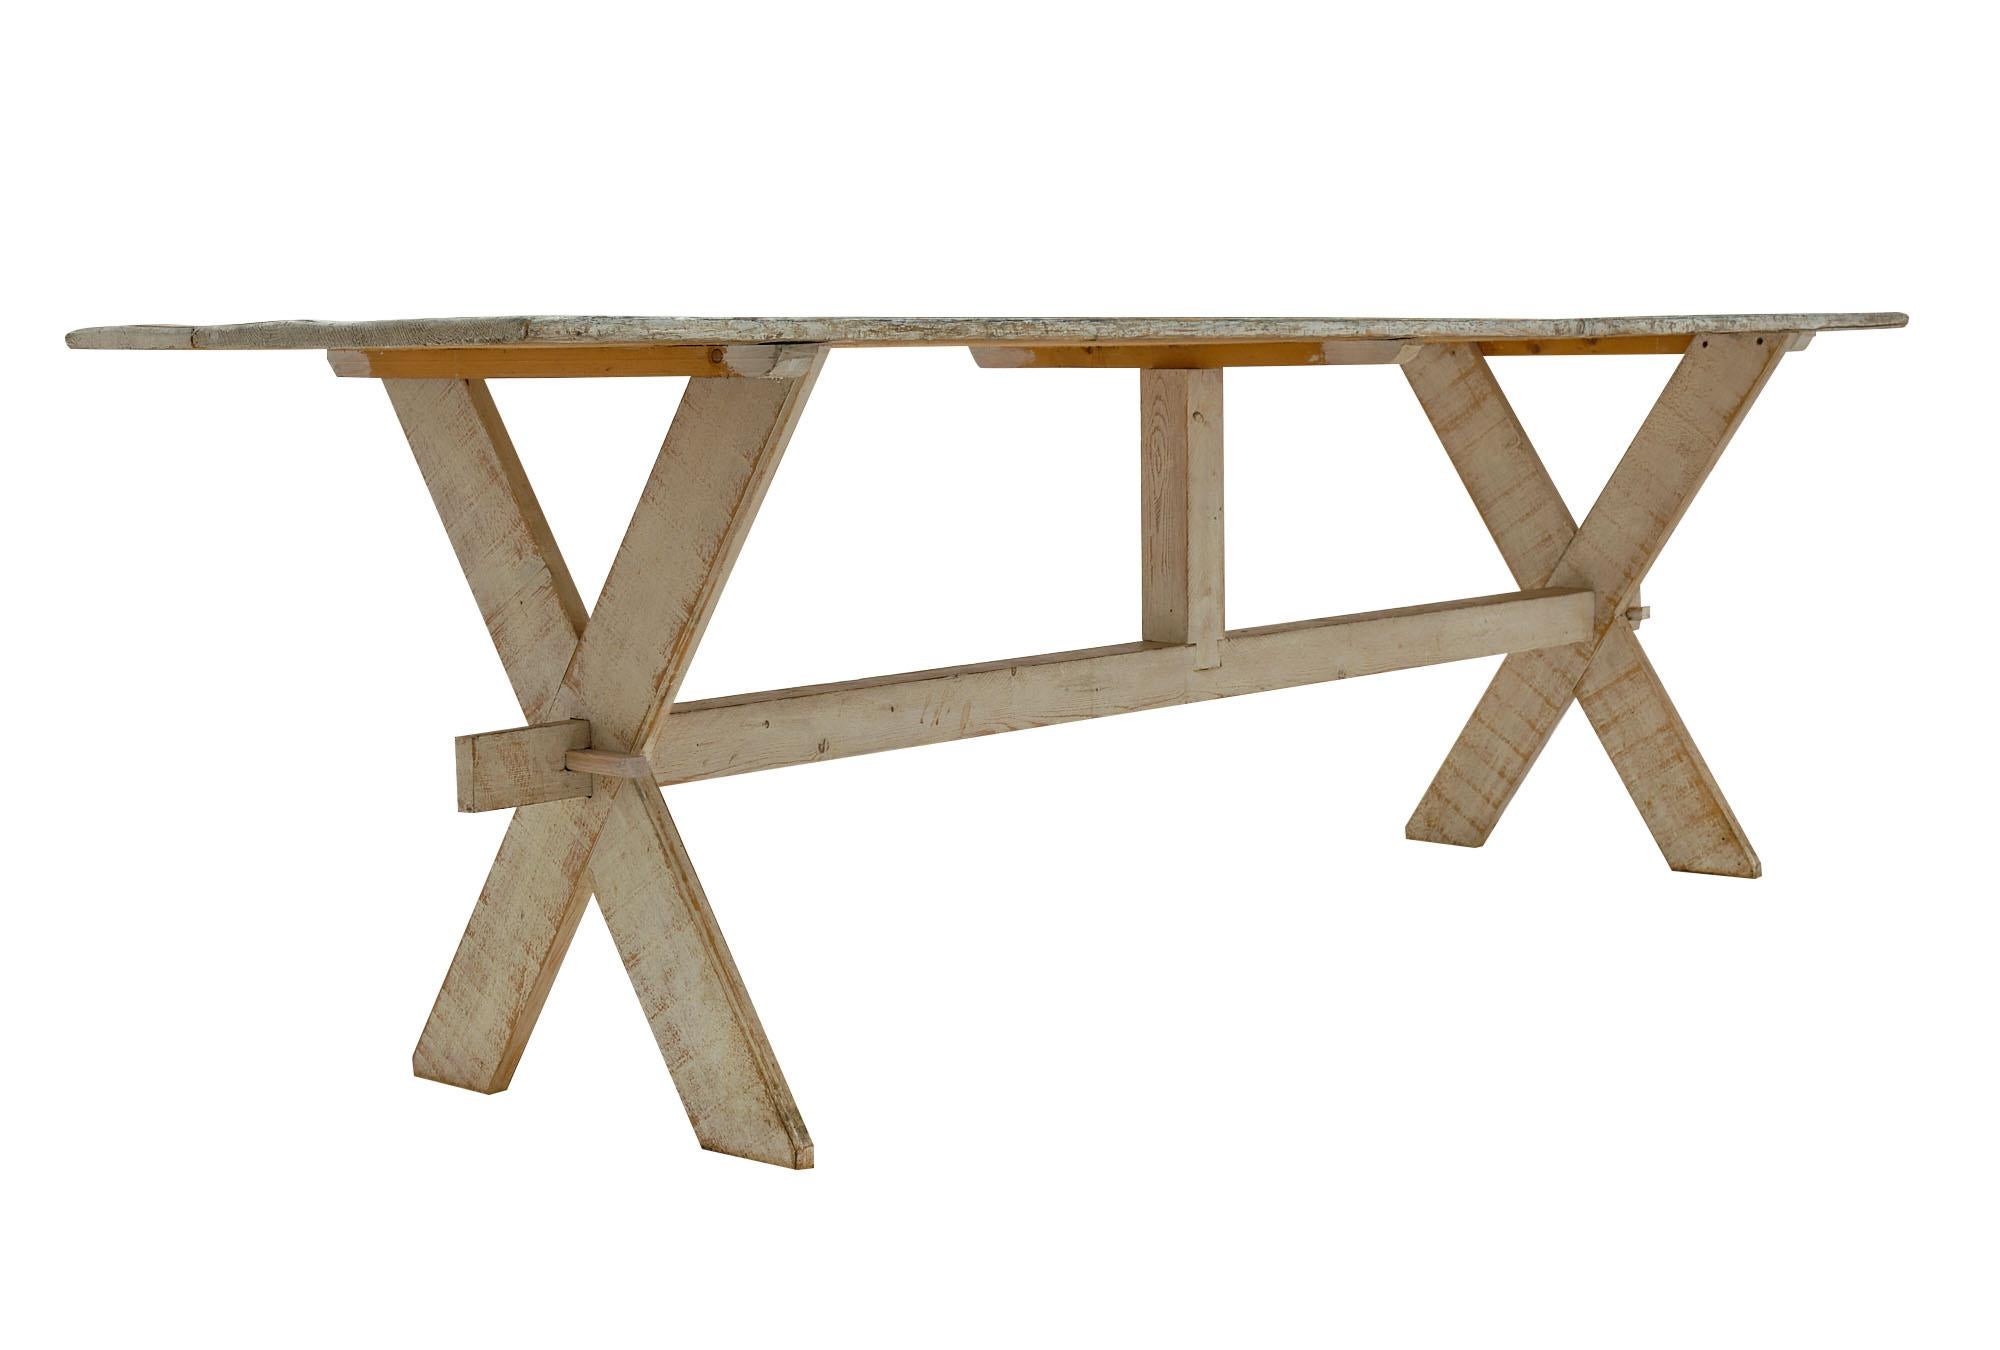 Antique capers picking farm table from Sicily, Italy.